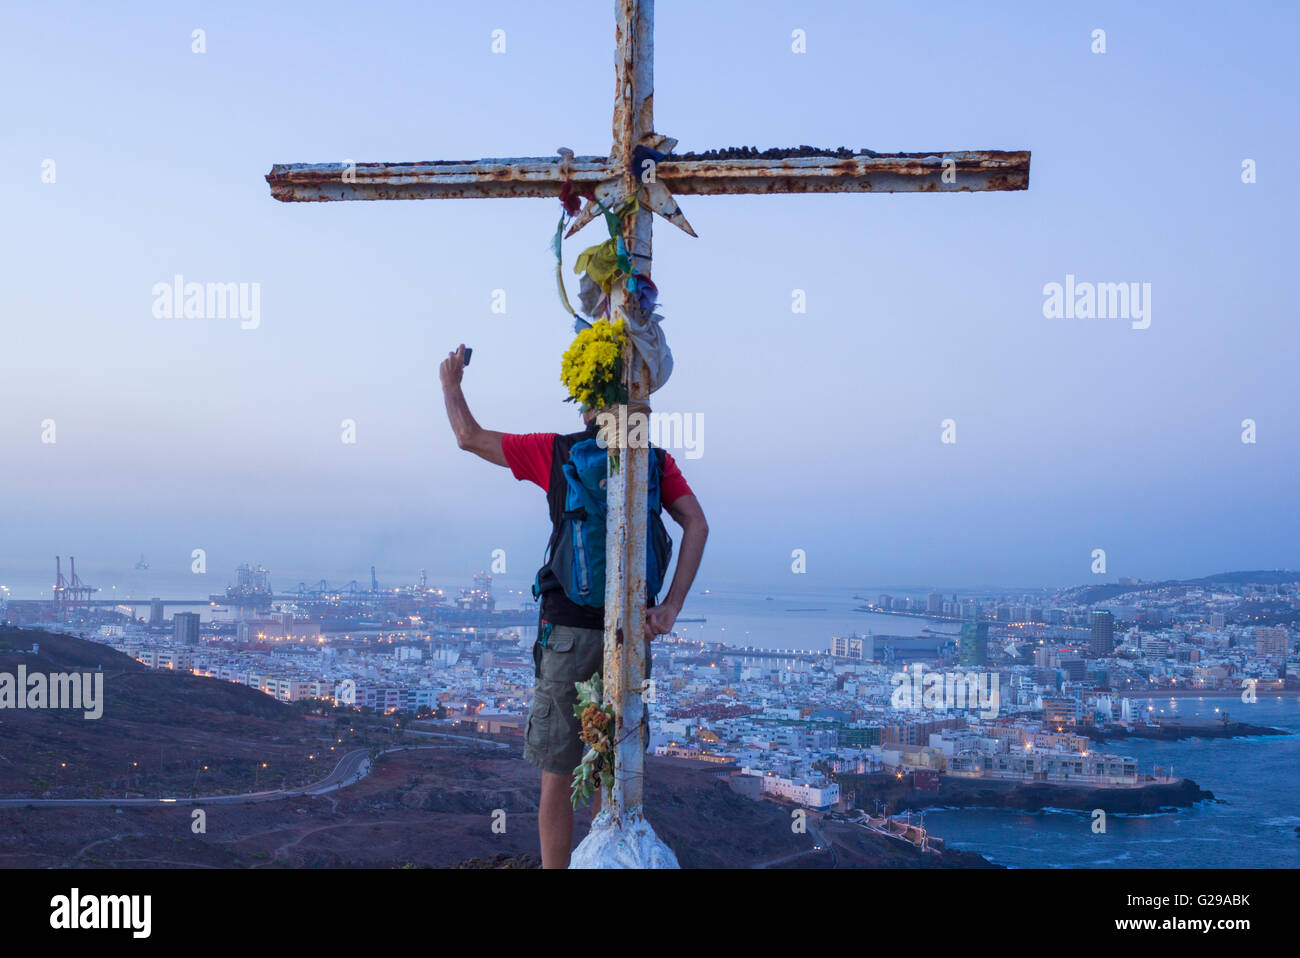 Las Palmas, Gran Canaria, Canary Islands, Spain, 26th May 2016. Weather: A hiker takes a selfie in pre dawn light from volcanic mountain overlooking Las Palmas city, the capital of Gran Canaria, on a cloudless morning in the city. Credit:  Alan Dawson News/Alamy Live News Stock Photo